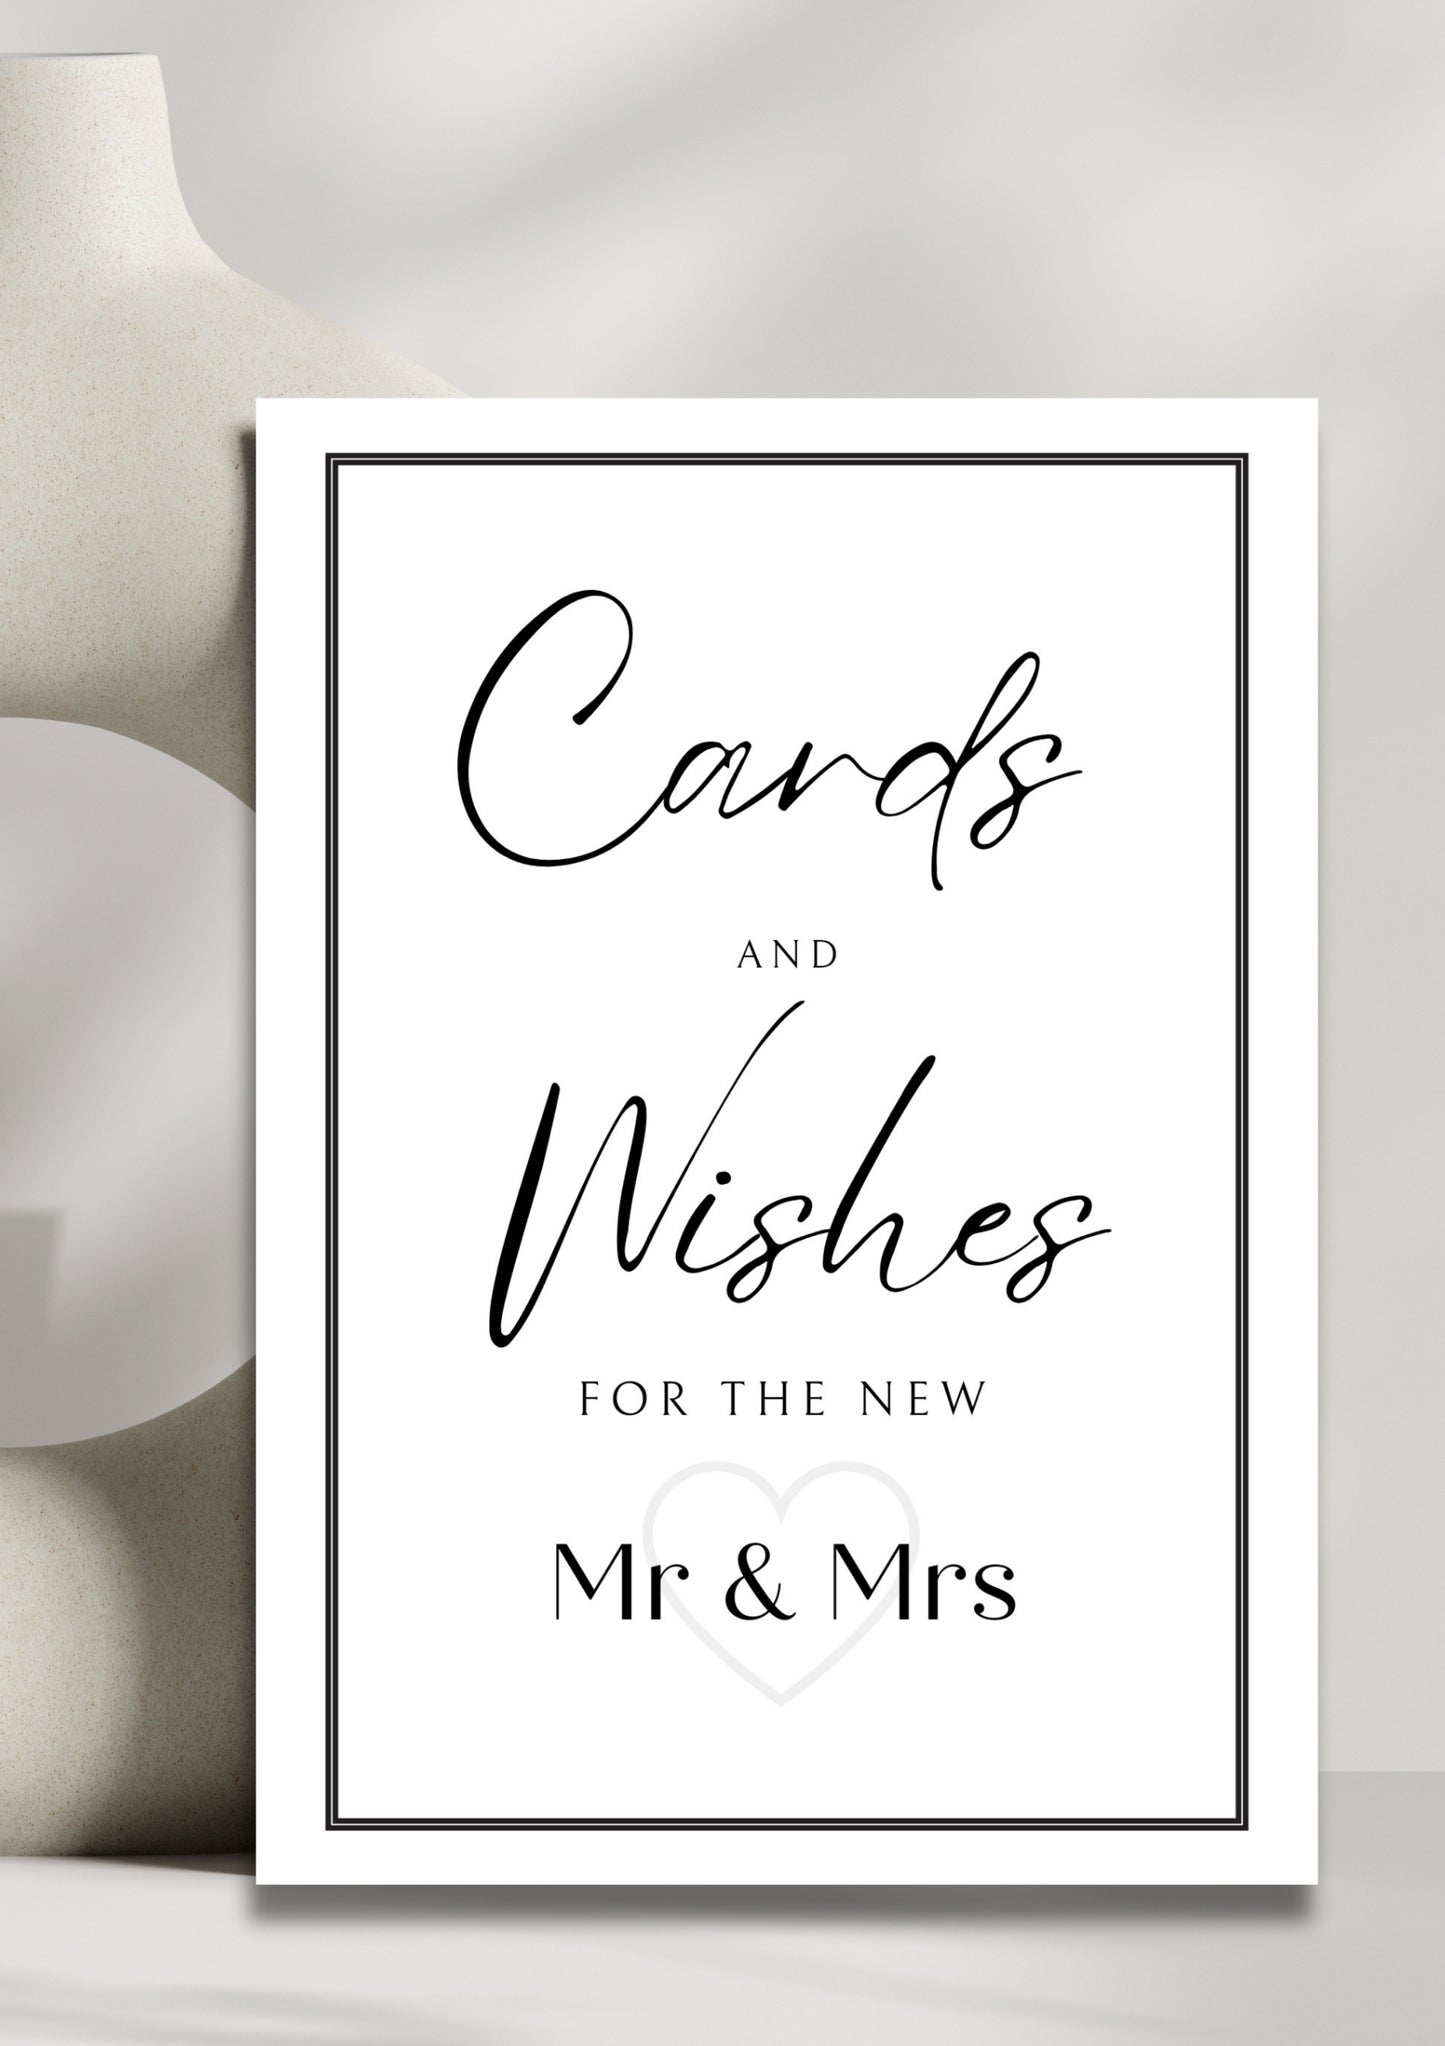 White stone collection - Cards & Wishes (Mr & Mrs)